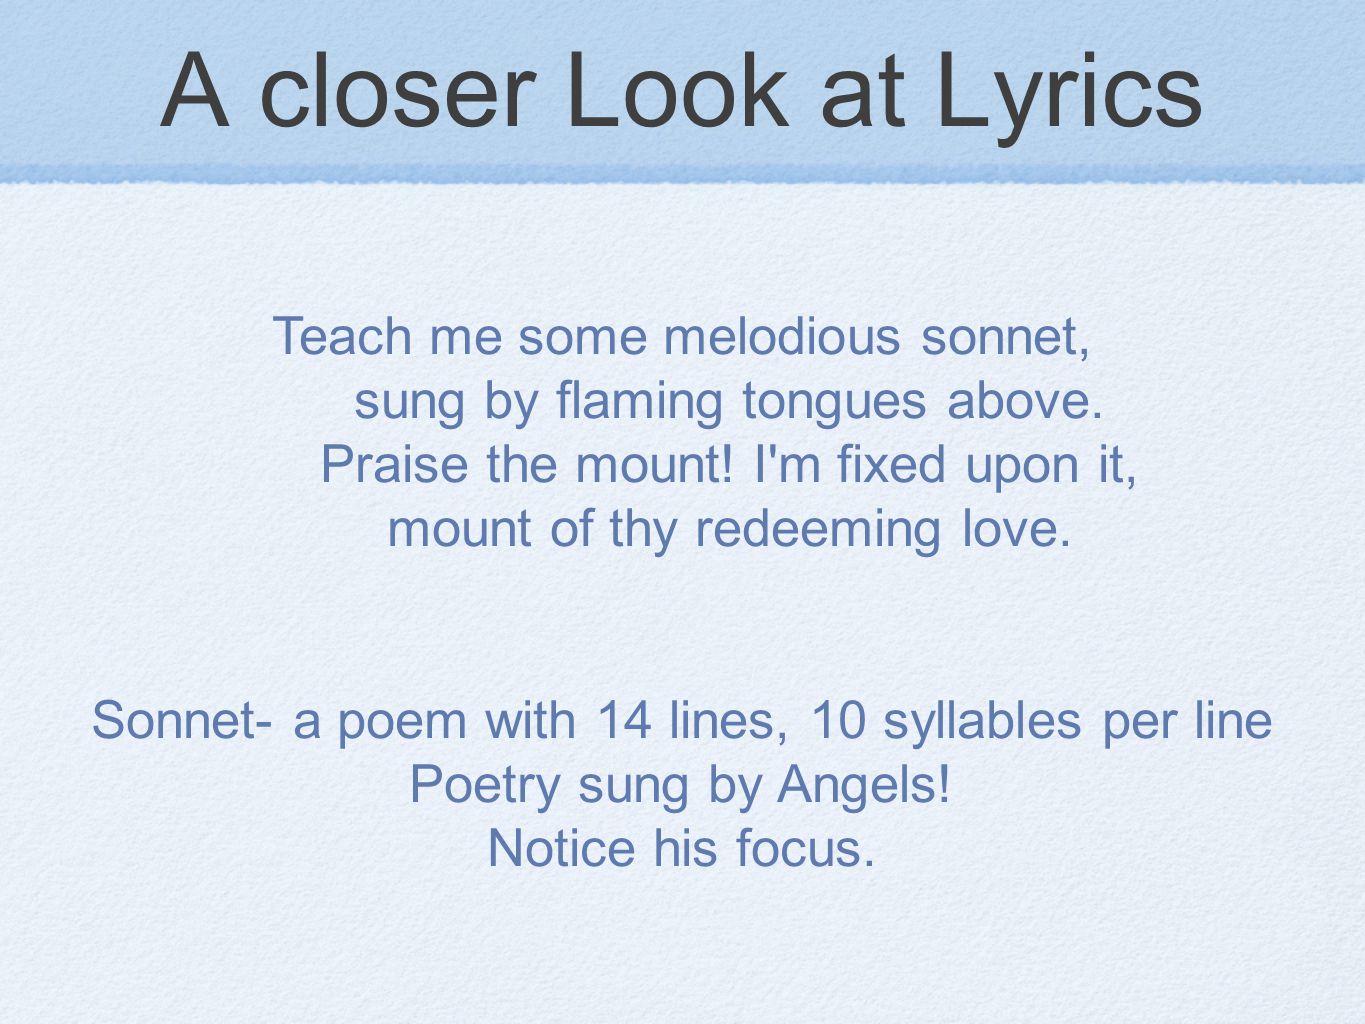 A closer Look at Lyrics Teach me some melodious sonnet, sung by flaming tongues above.